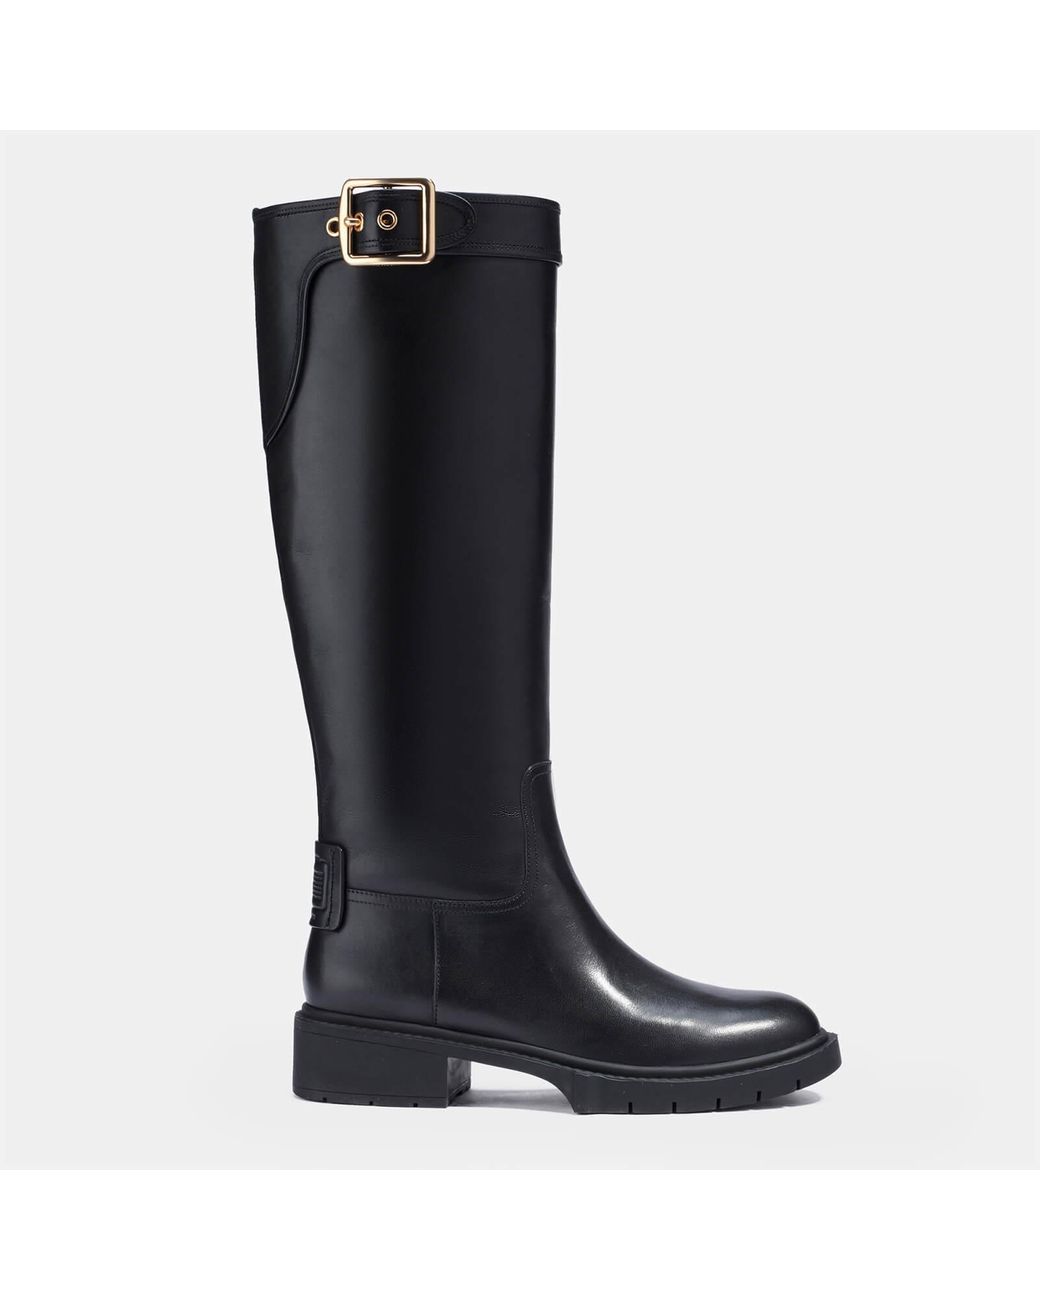 COACH Leigh Leather Knee High Boots in Black | Lyst UK